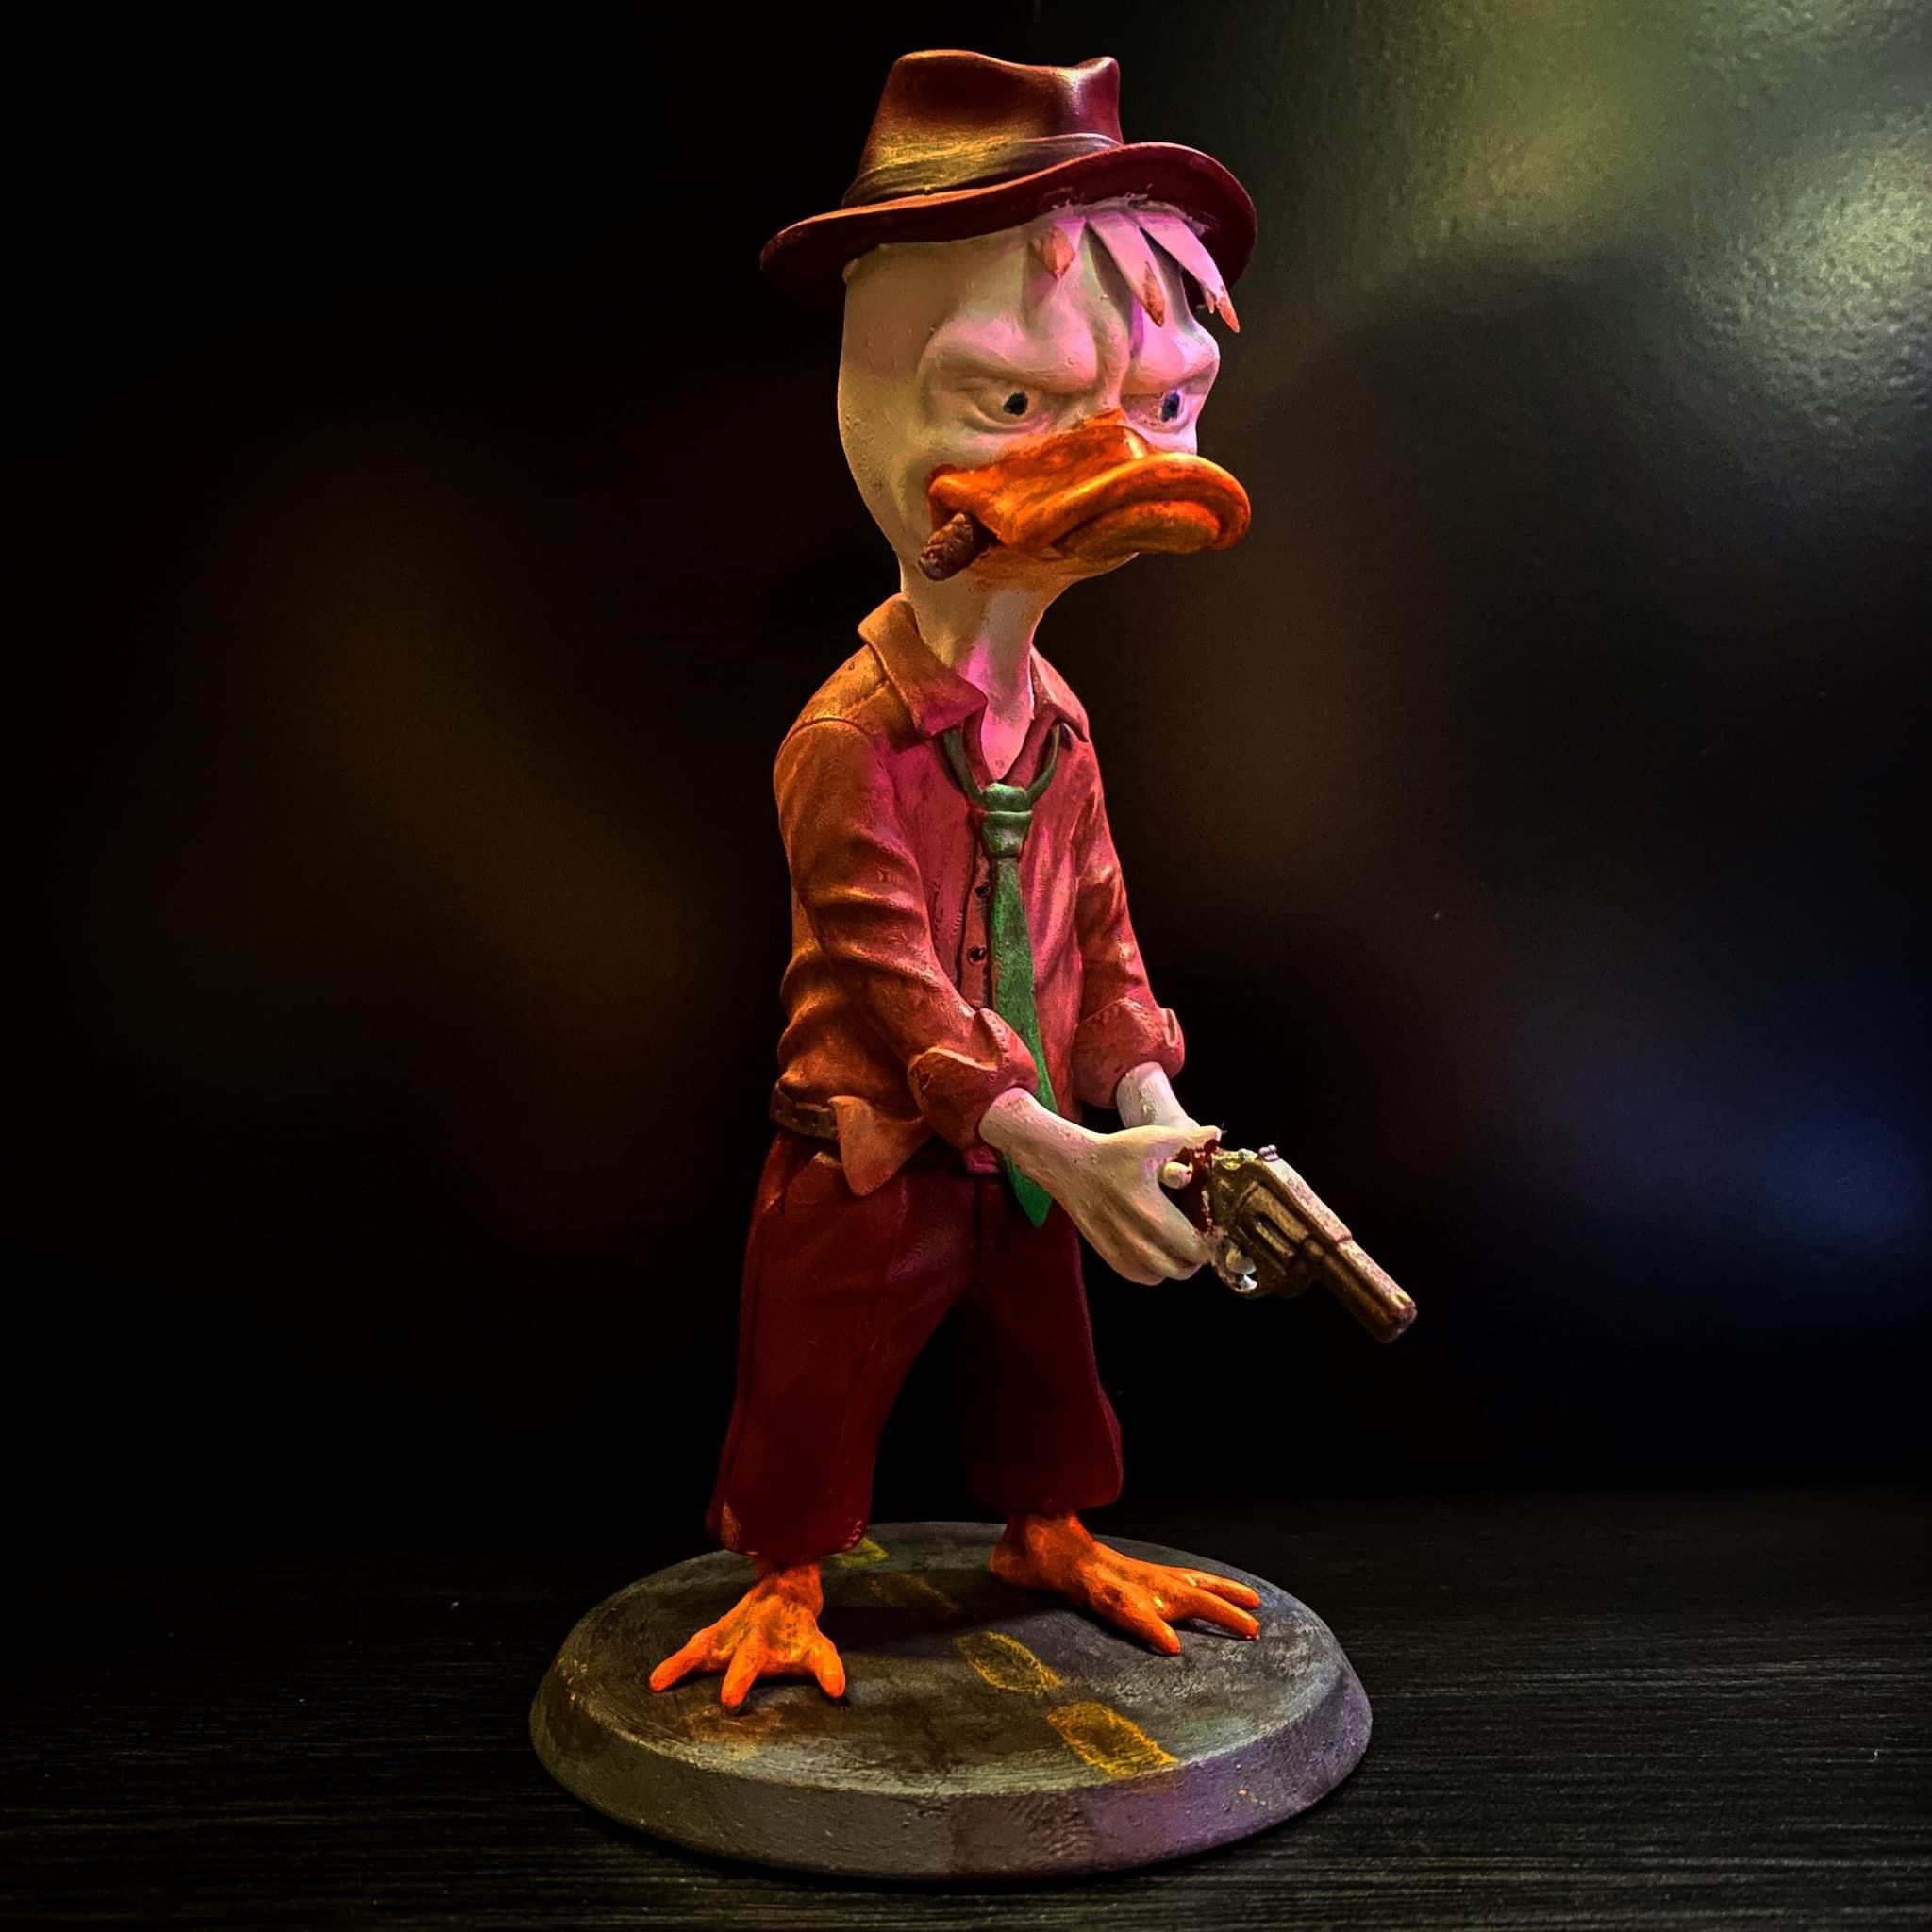 Duck detective - with a gun